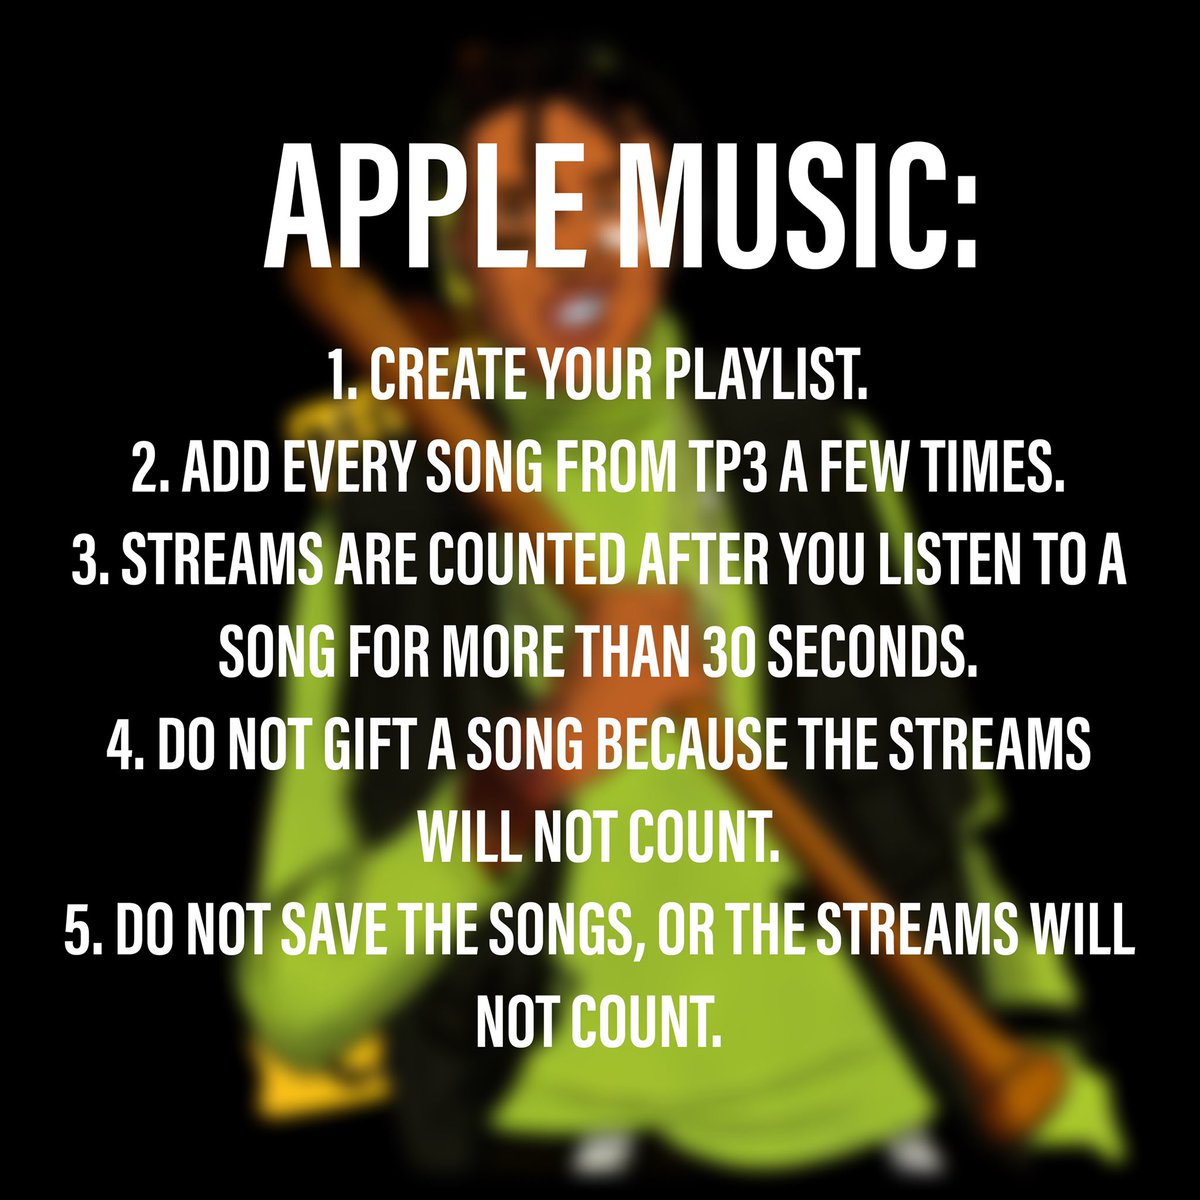 STREAMING PARTY RULES: